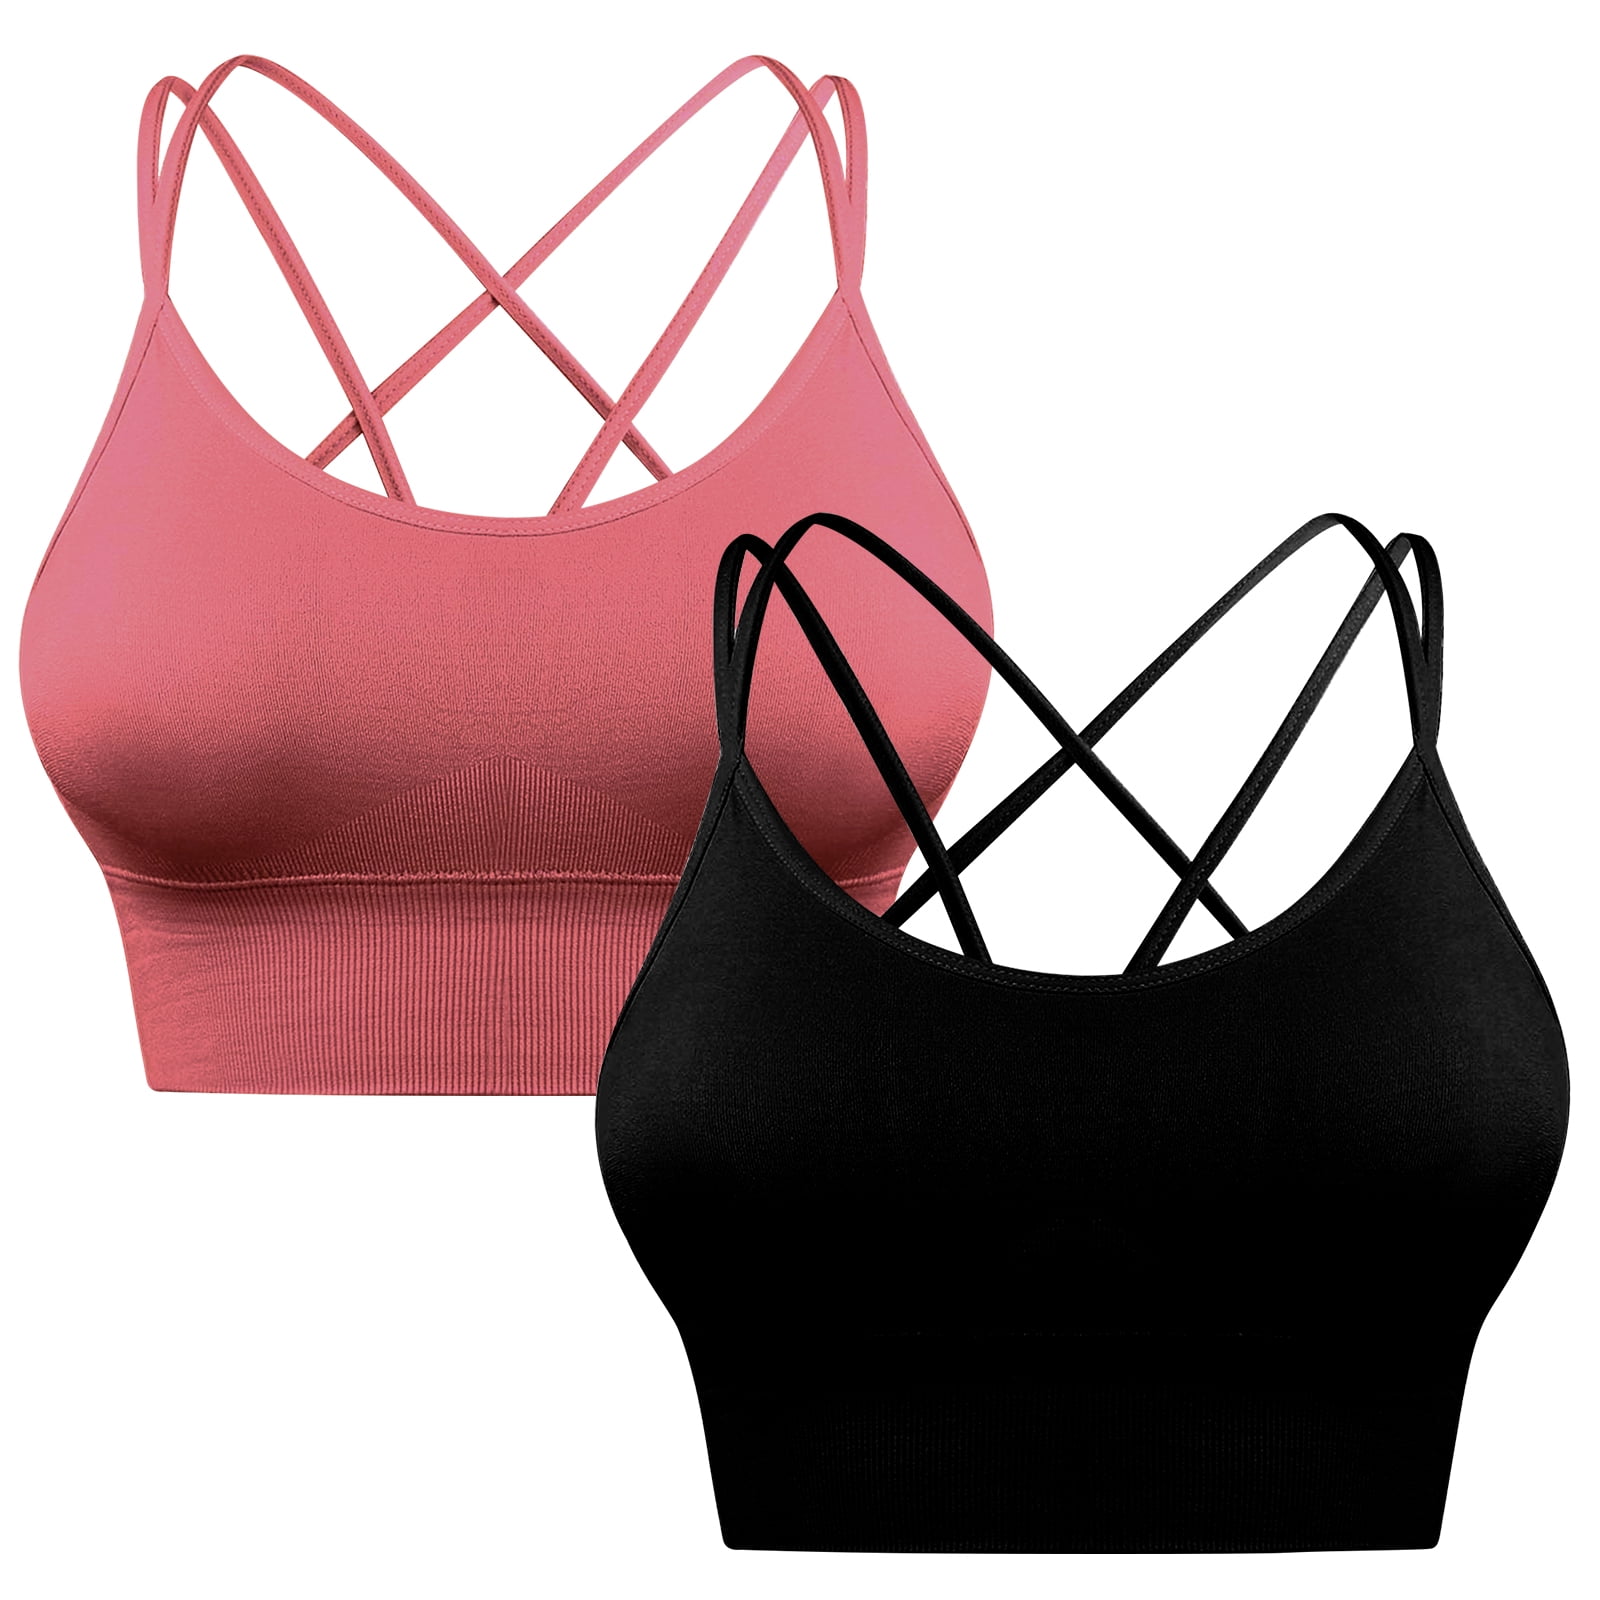 Padded Comfortable Workout Bras, Black Cross Back Sports Bras with Low  Impact for Women, Strappy Yoga Bra for Indoor Outdoor Running Fitness, L  Size